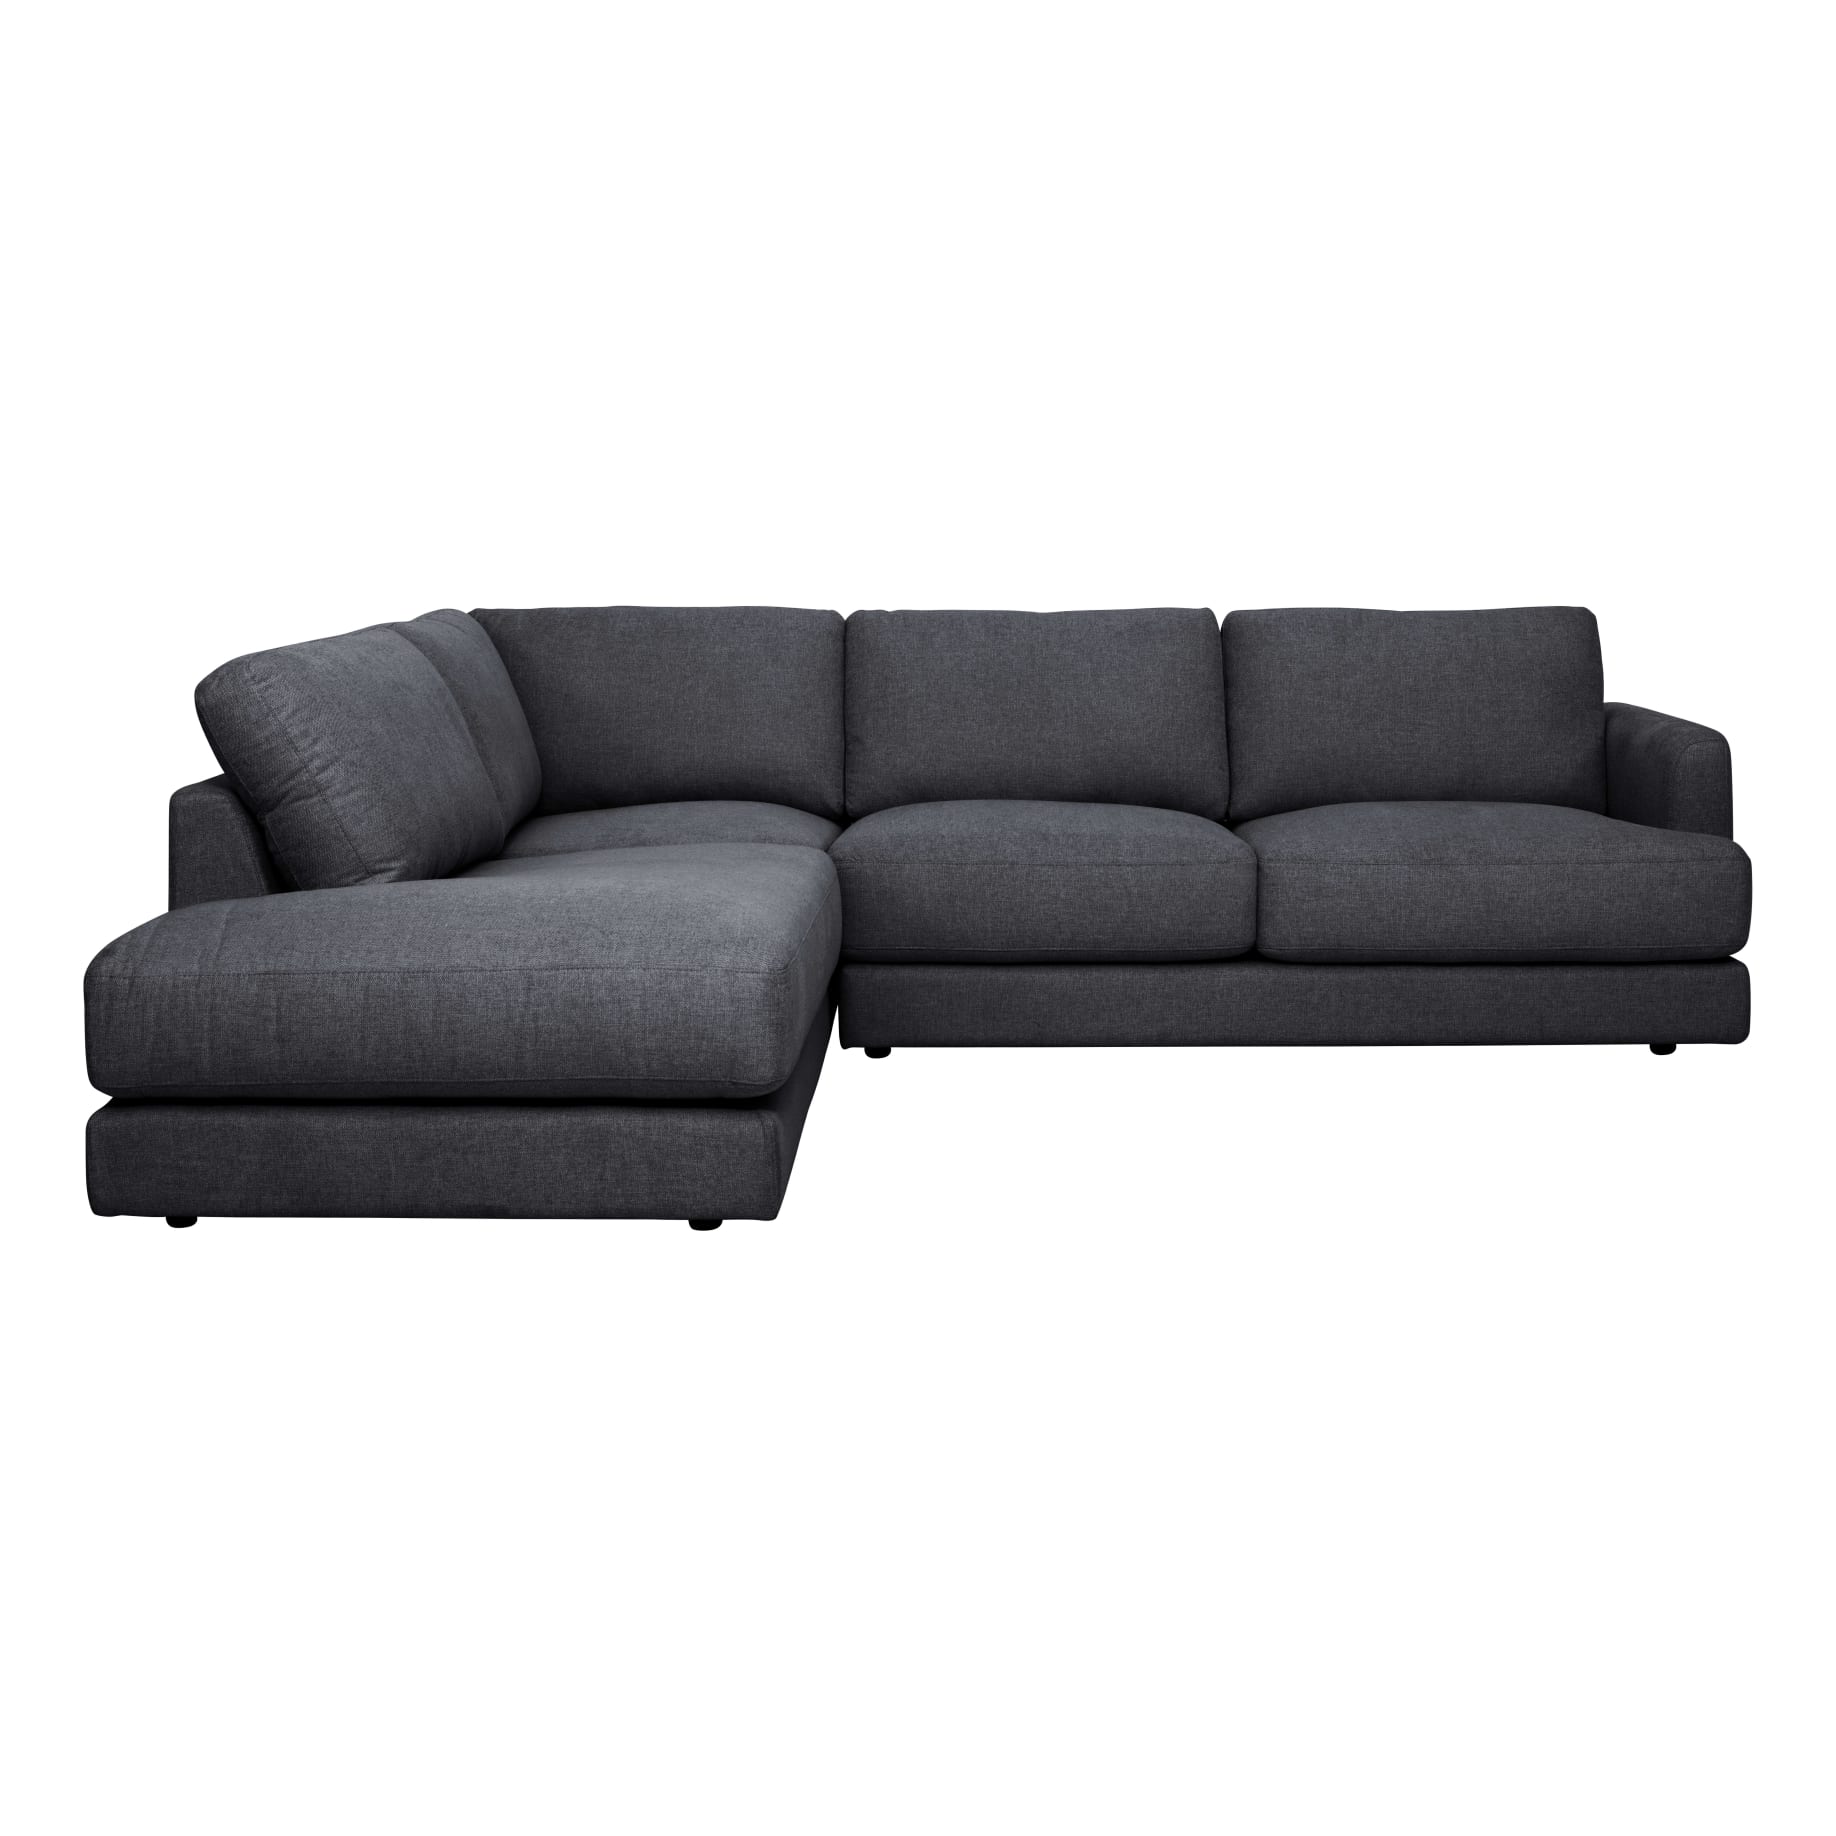 Temple Corner Chaise LHF in Belfast Charcoal